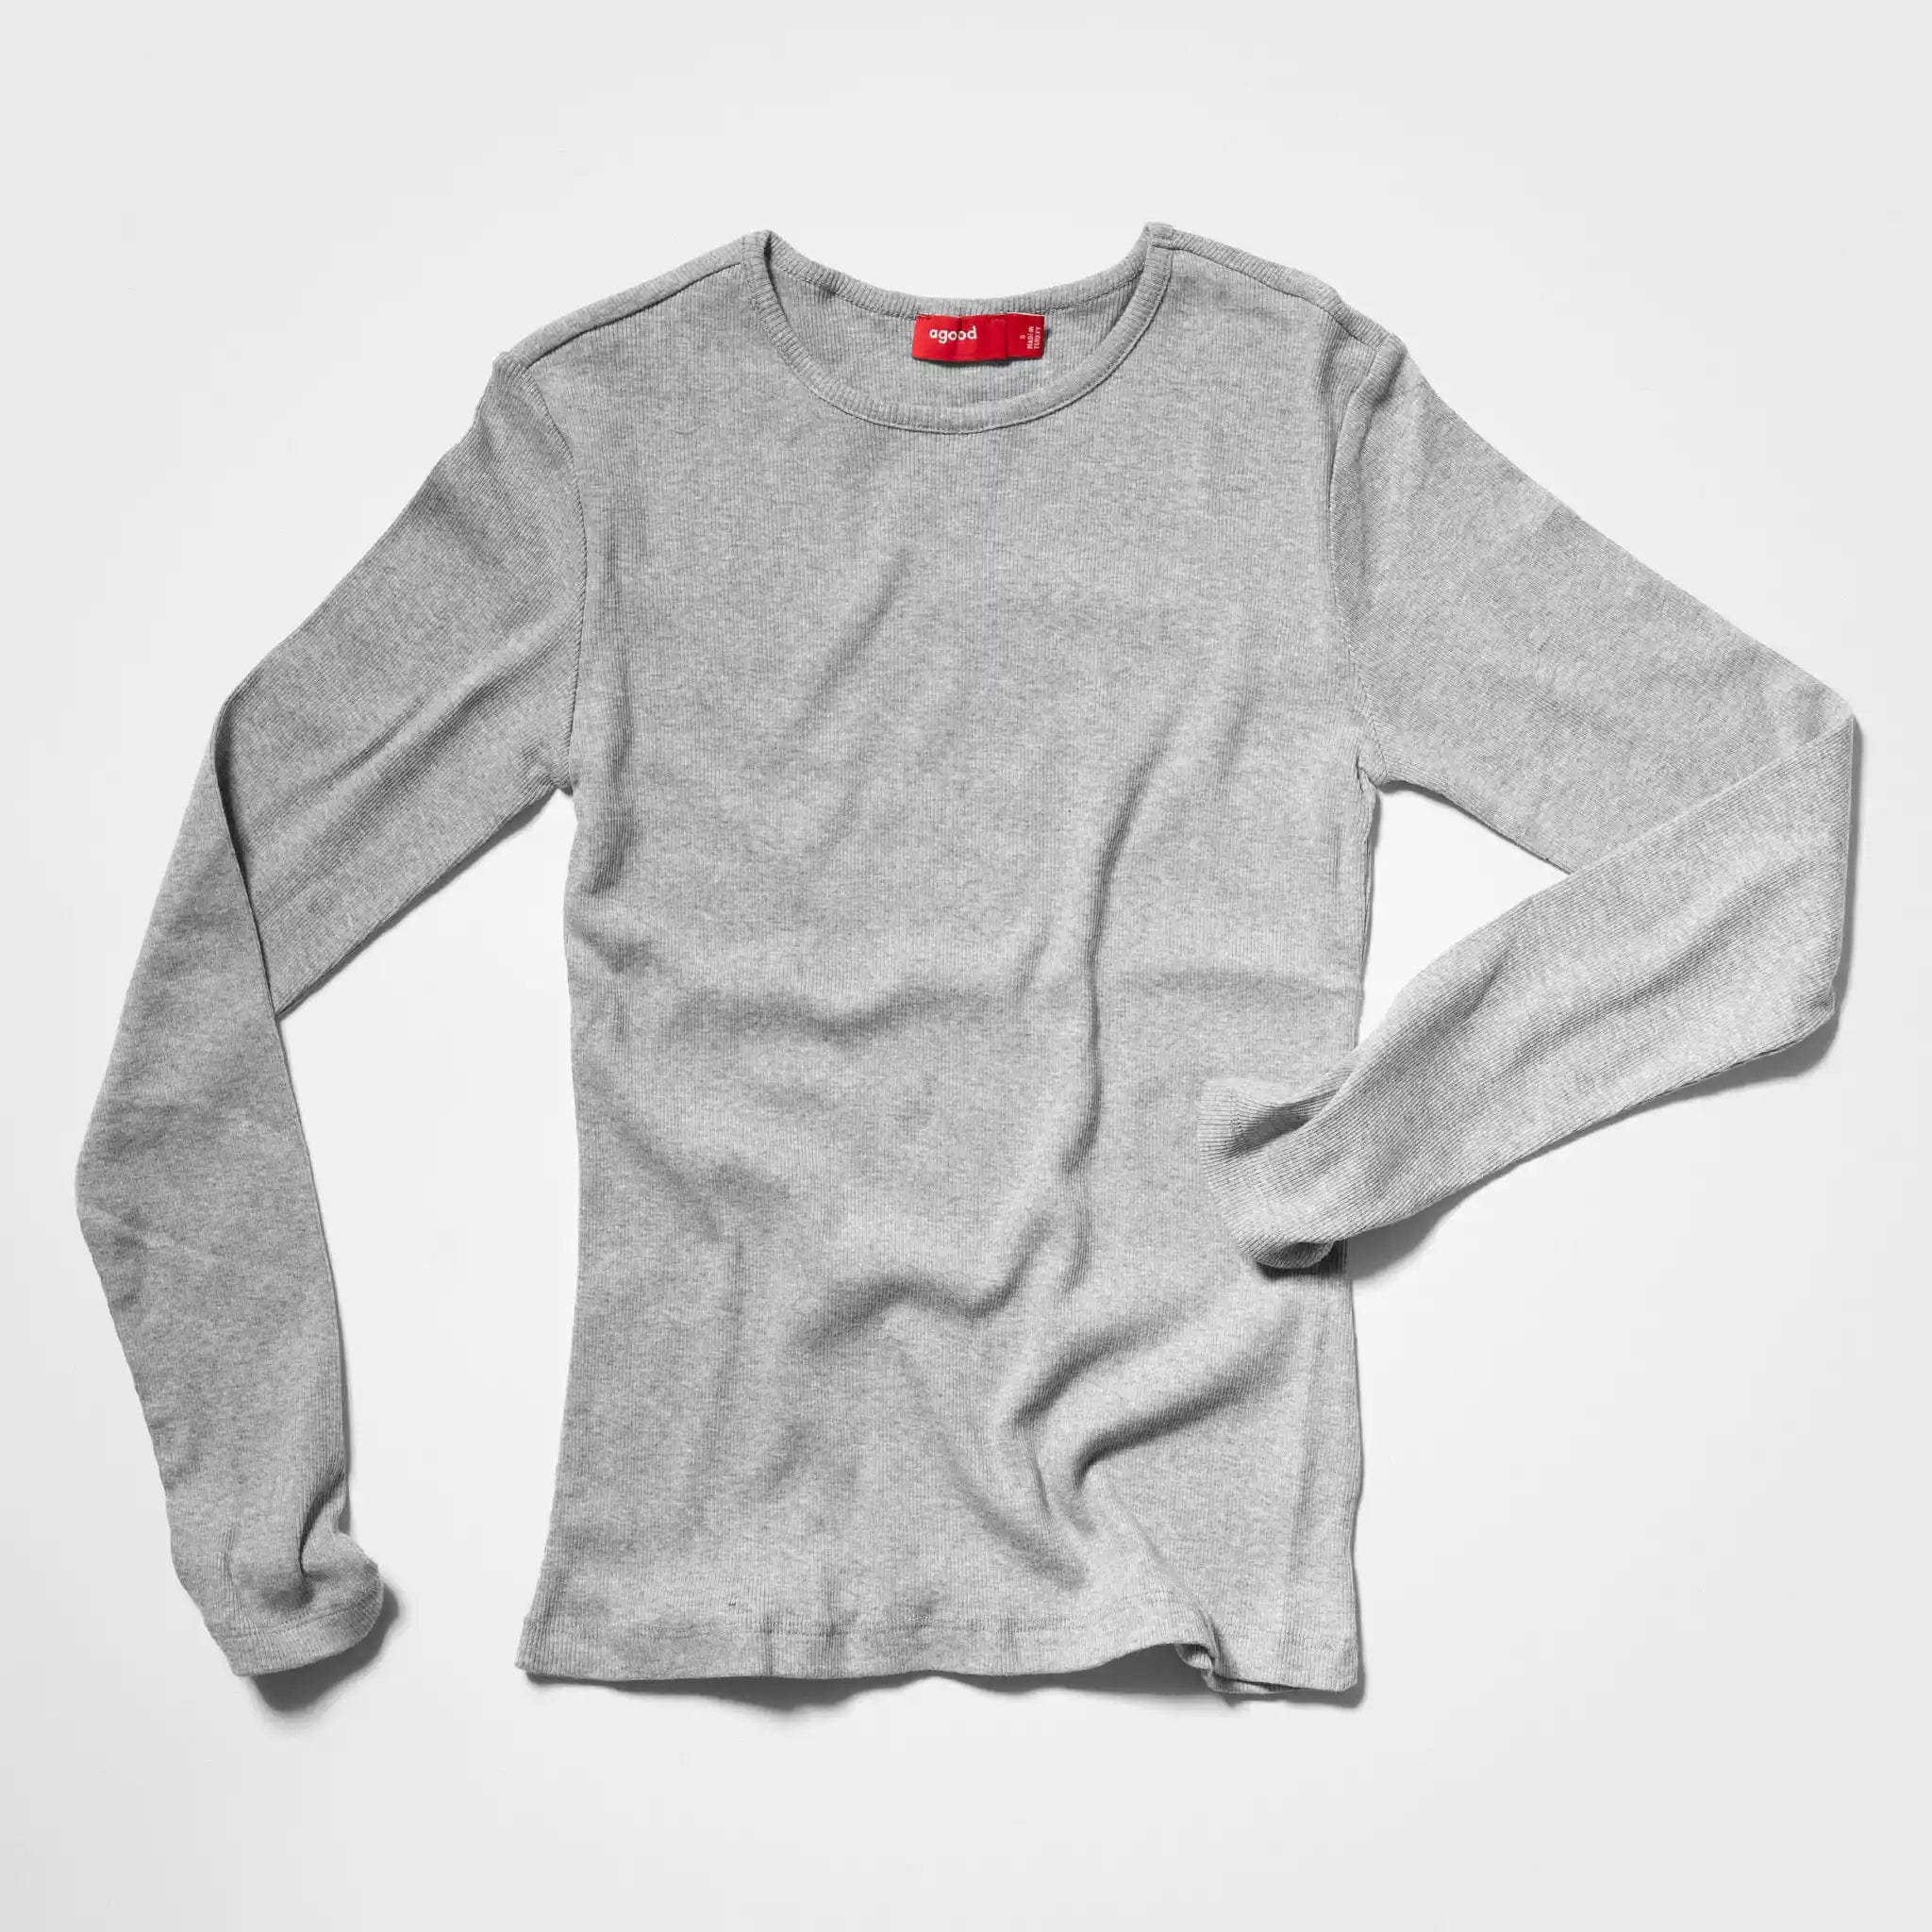 Grey Long-Sleeved T-Shirt Made from Organic Cotton